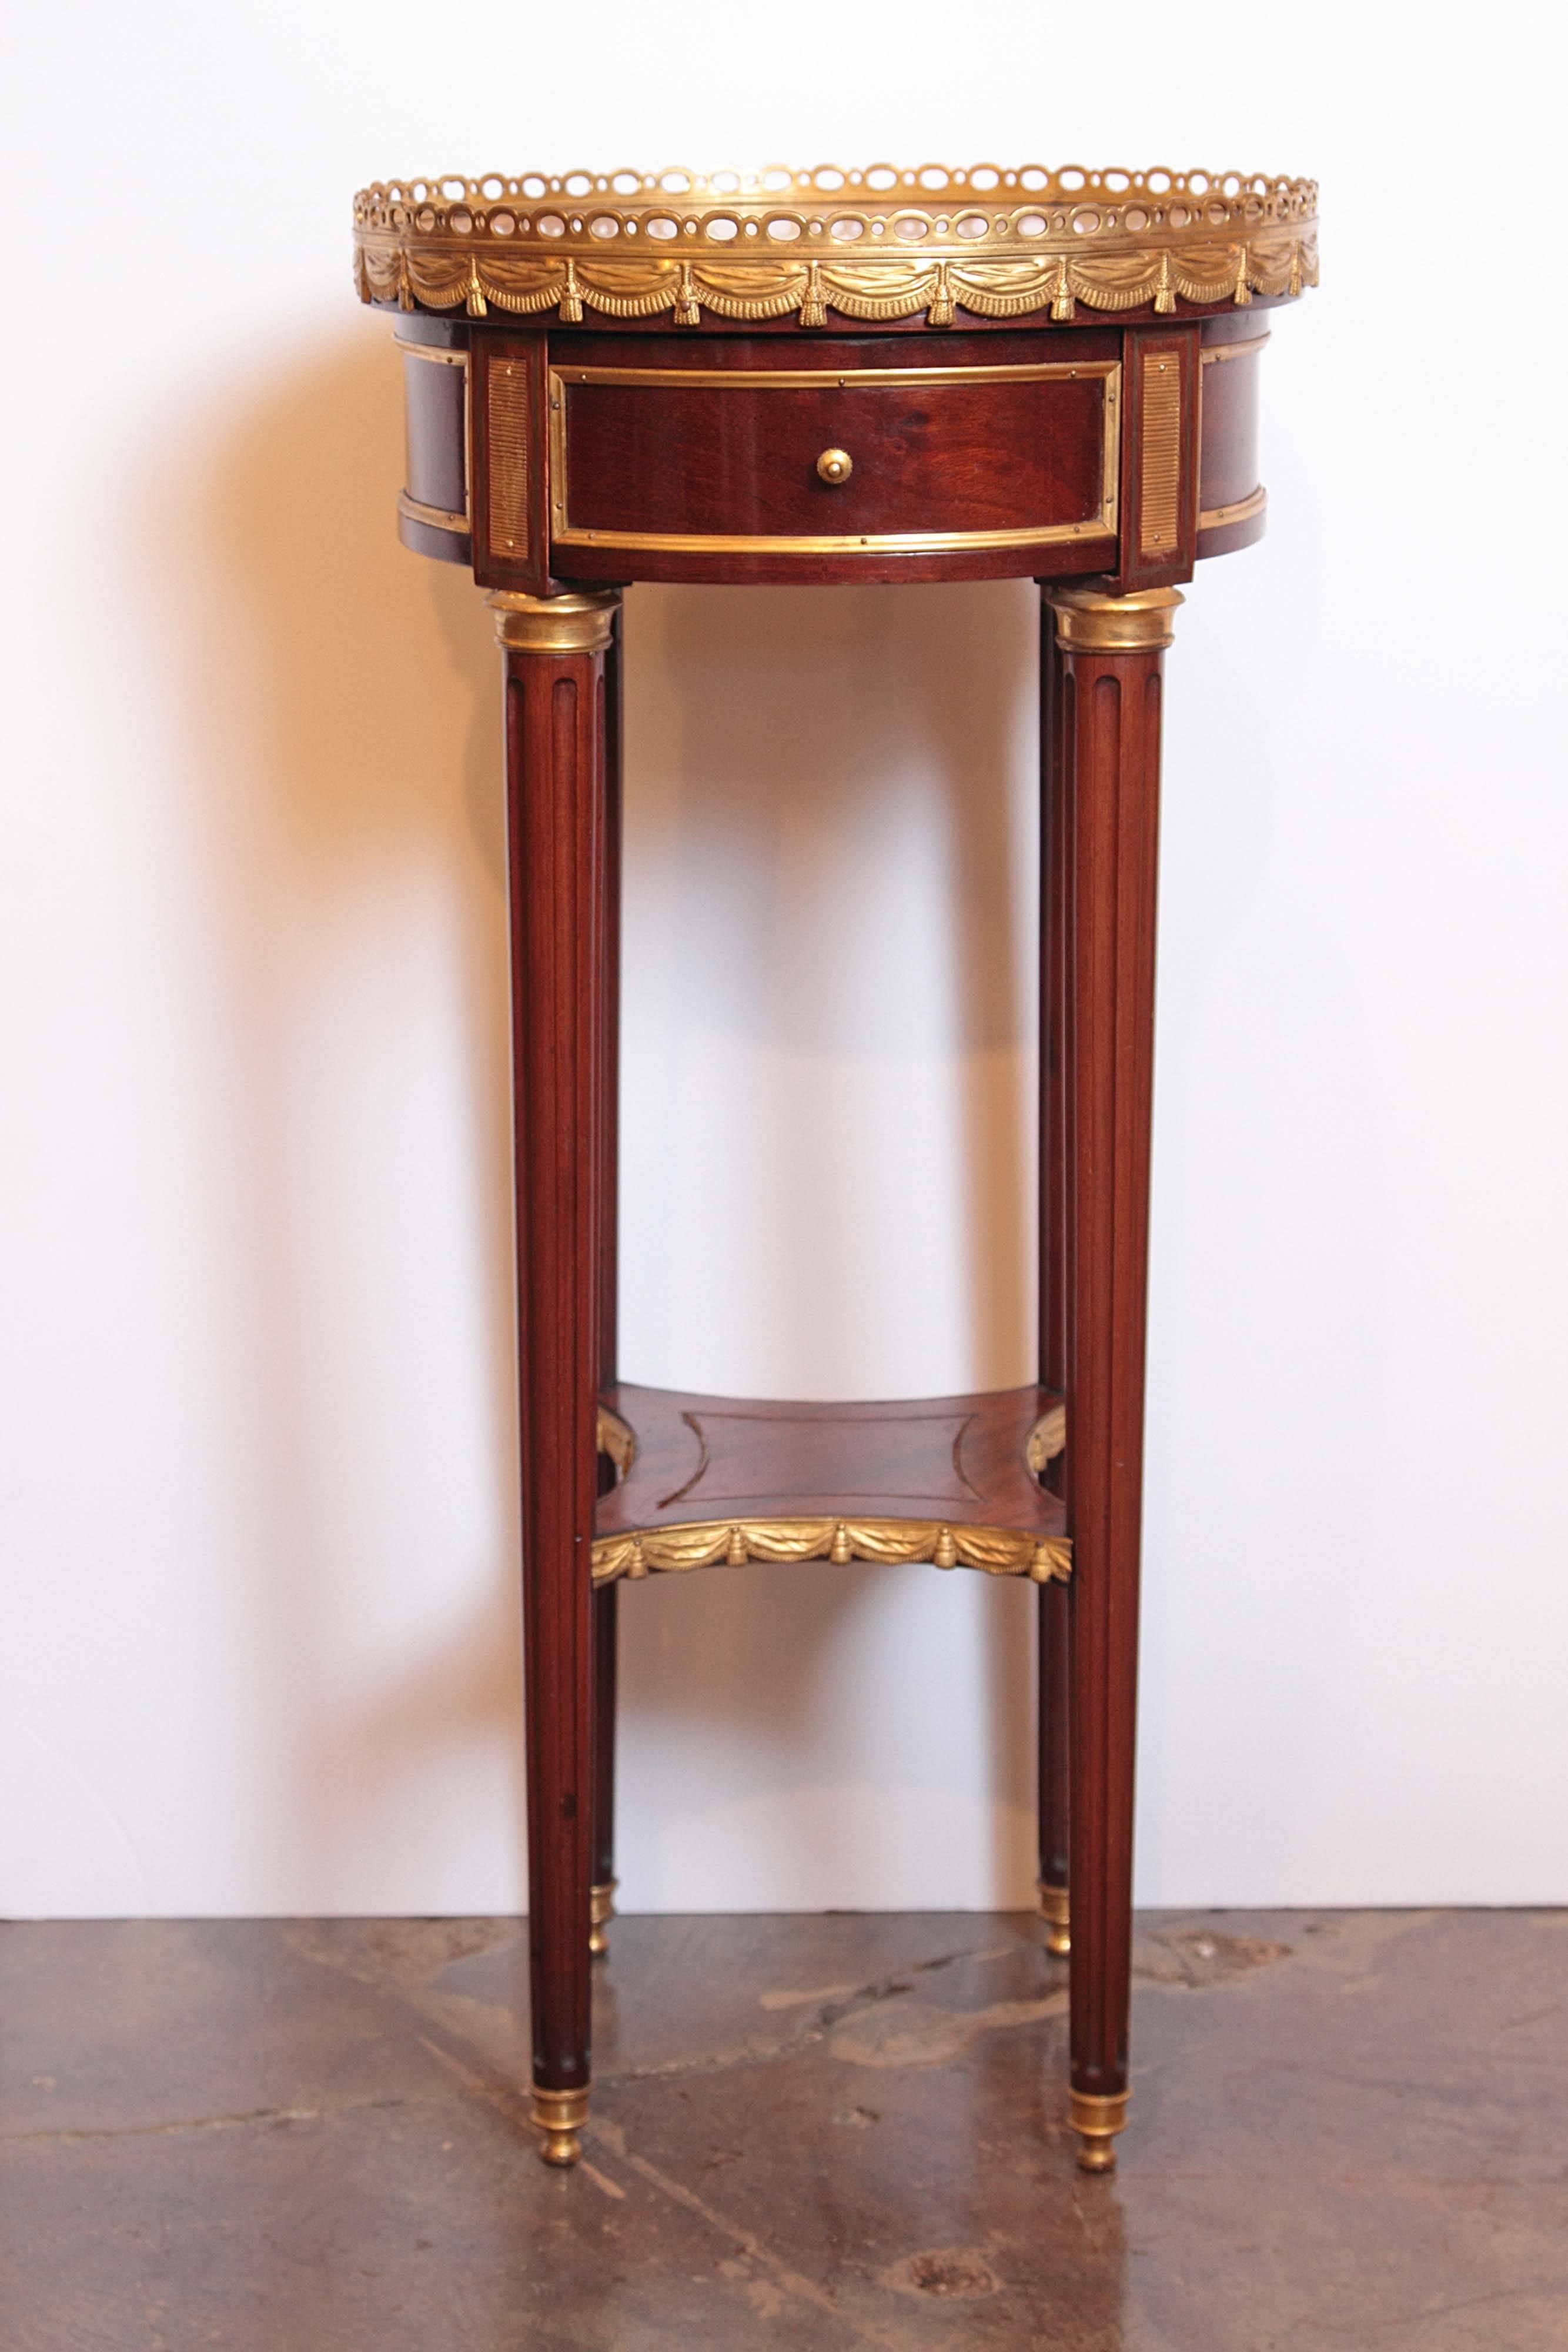 19th century fine side table by Edwards and Roberts. Fine quality mahogany and gilt bronze side table with brèche d'Alep marble top. Single drawer stamped Edwards and Roberts.